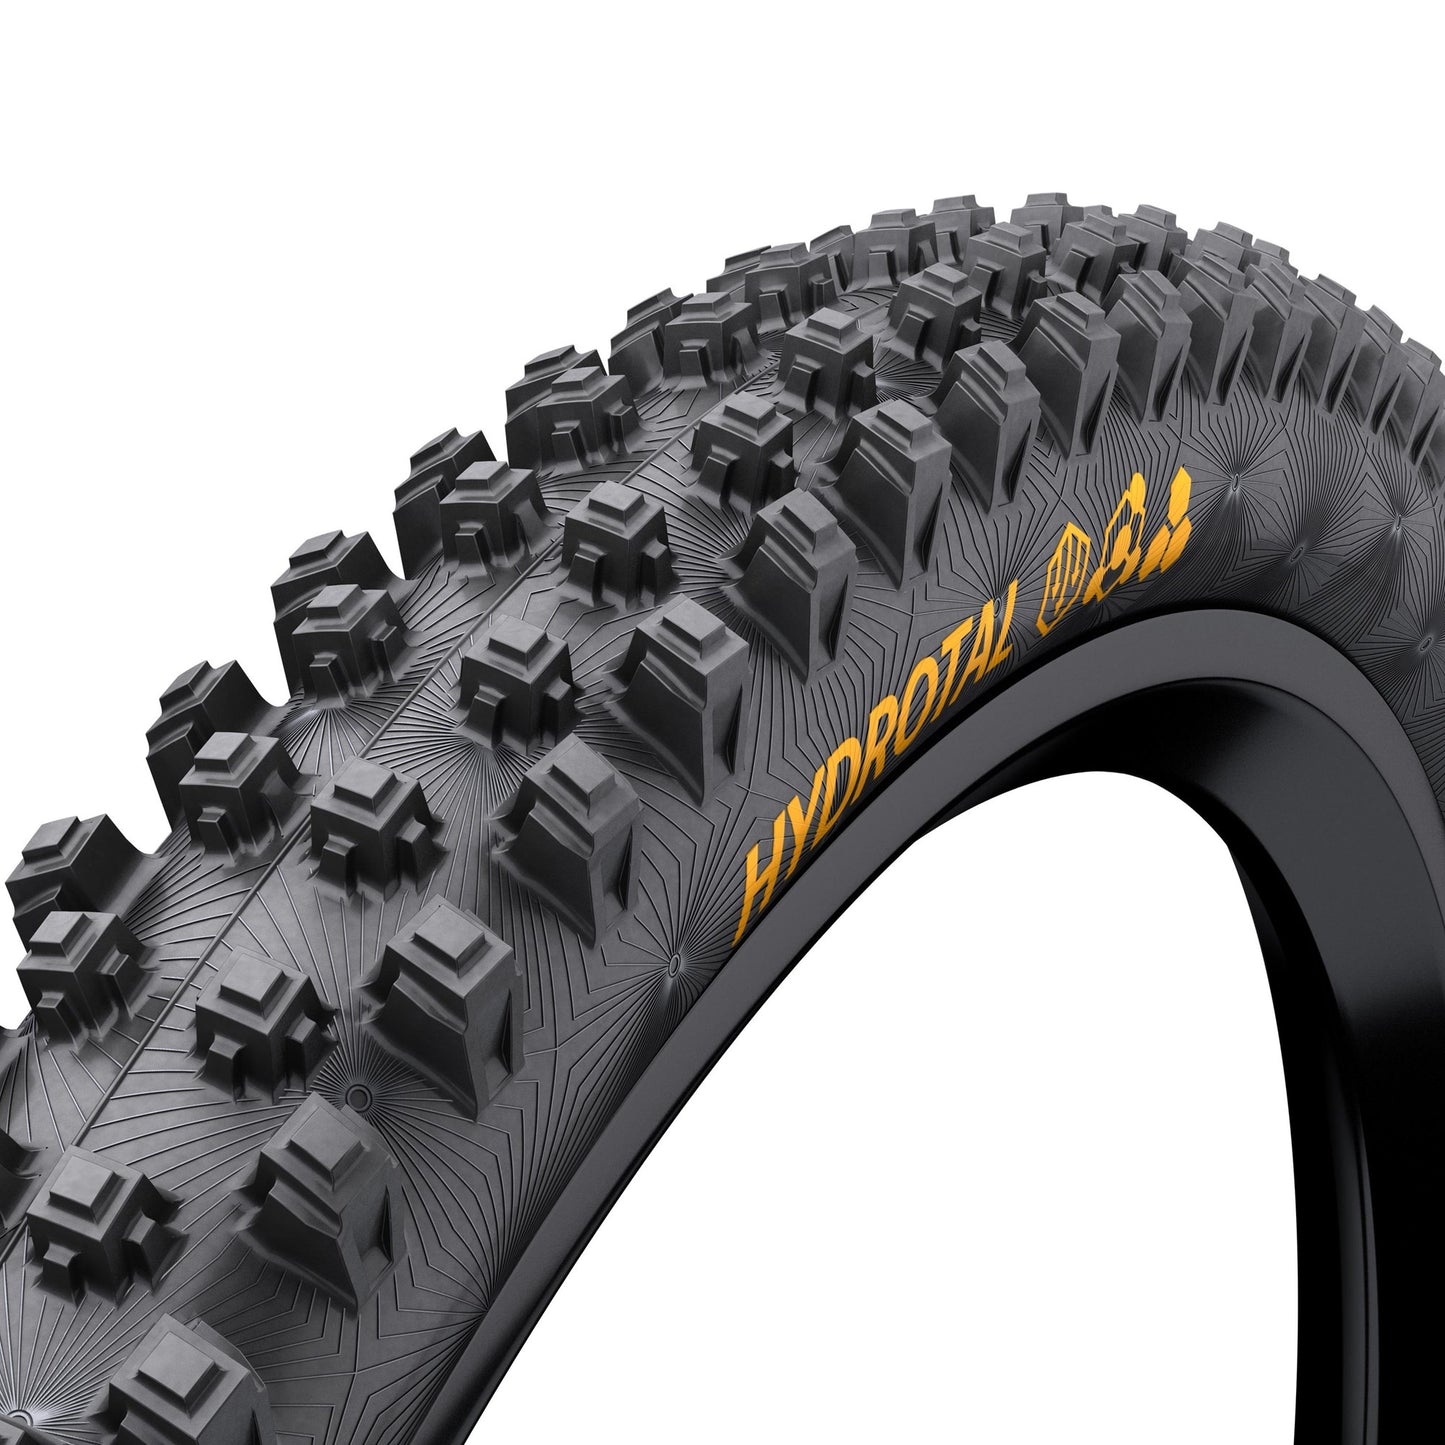 CONTINENTAL HYDROTAL DOWNHILL 29X2.40" SUPERSOFT FOLDING TYRE